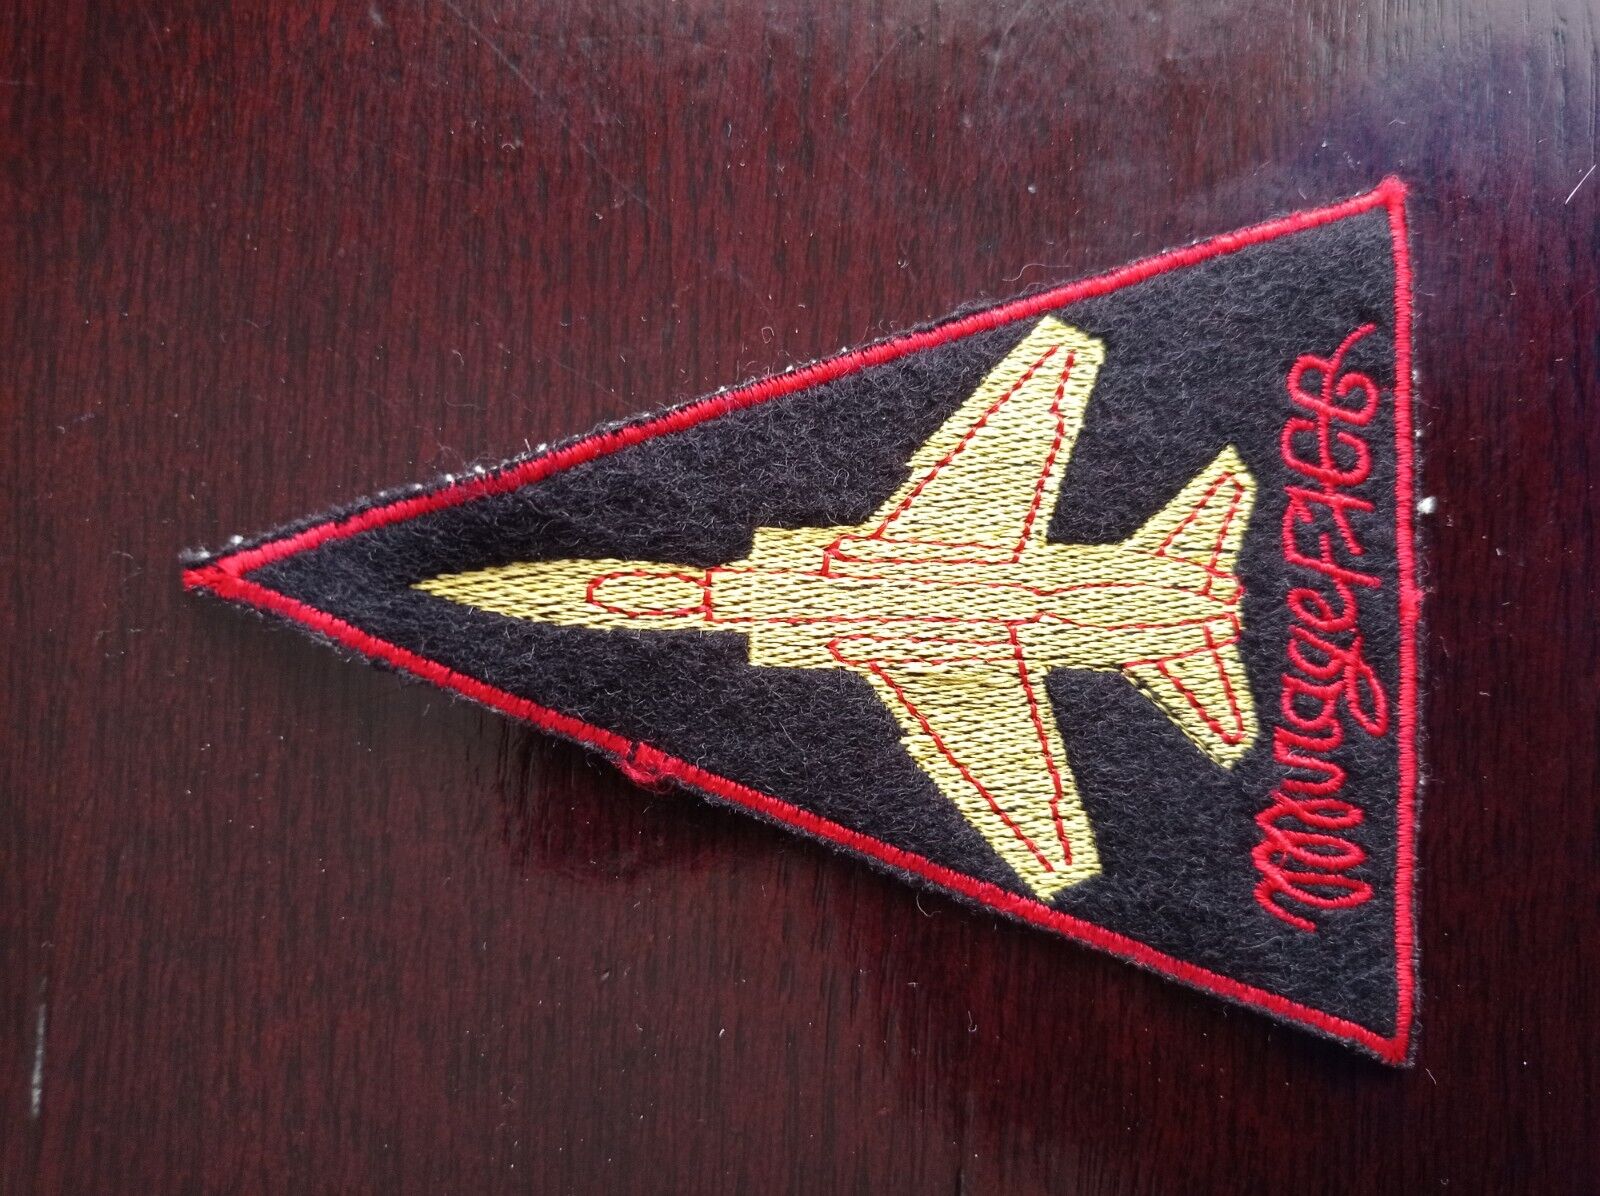 Mirage F1 patch